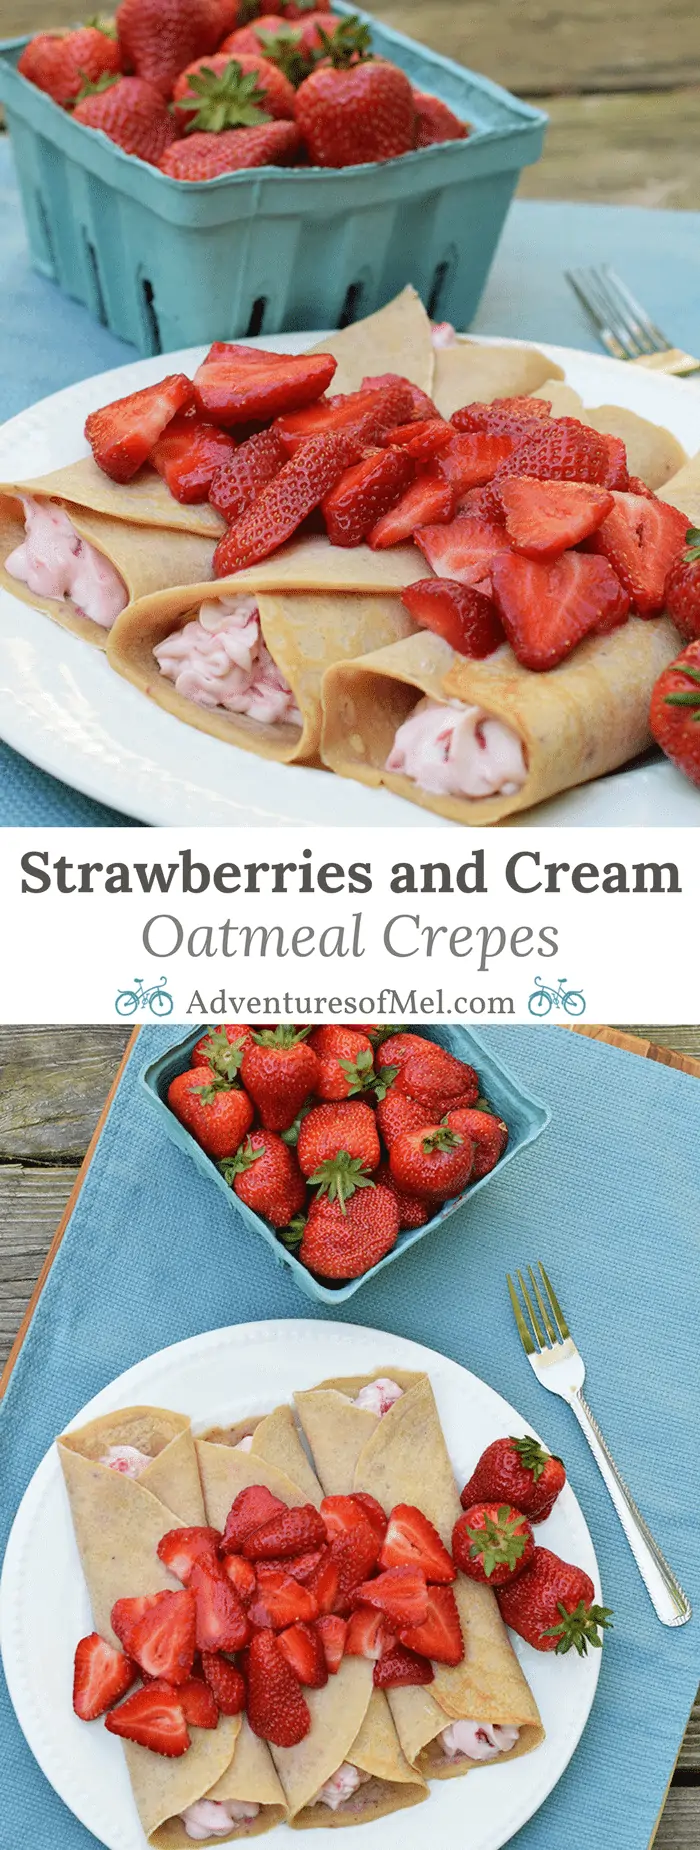 Homemade Sweet and Savory Strawberries and Cream Oatmeal Crepes, made with baby cereal, are so simple and easy to make, scrumptious too! Print the recipe for this breakfast and brunch favorite.